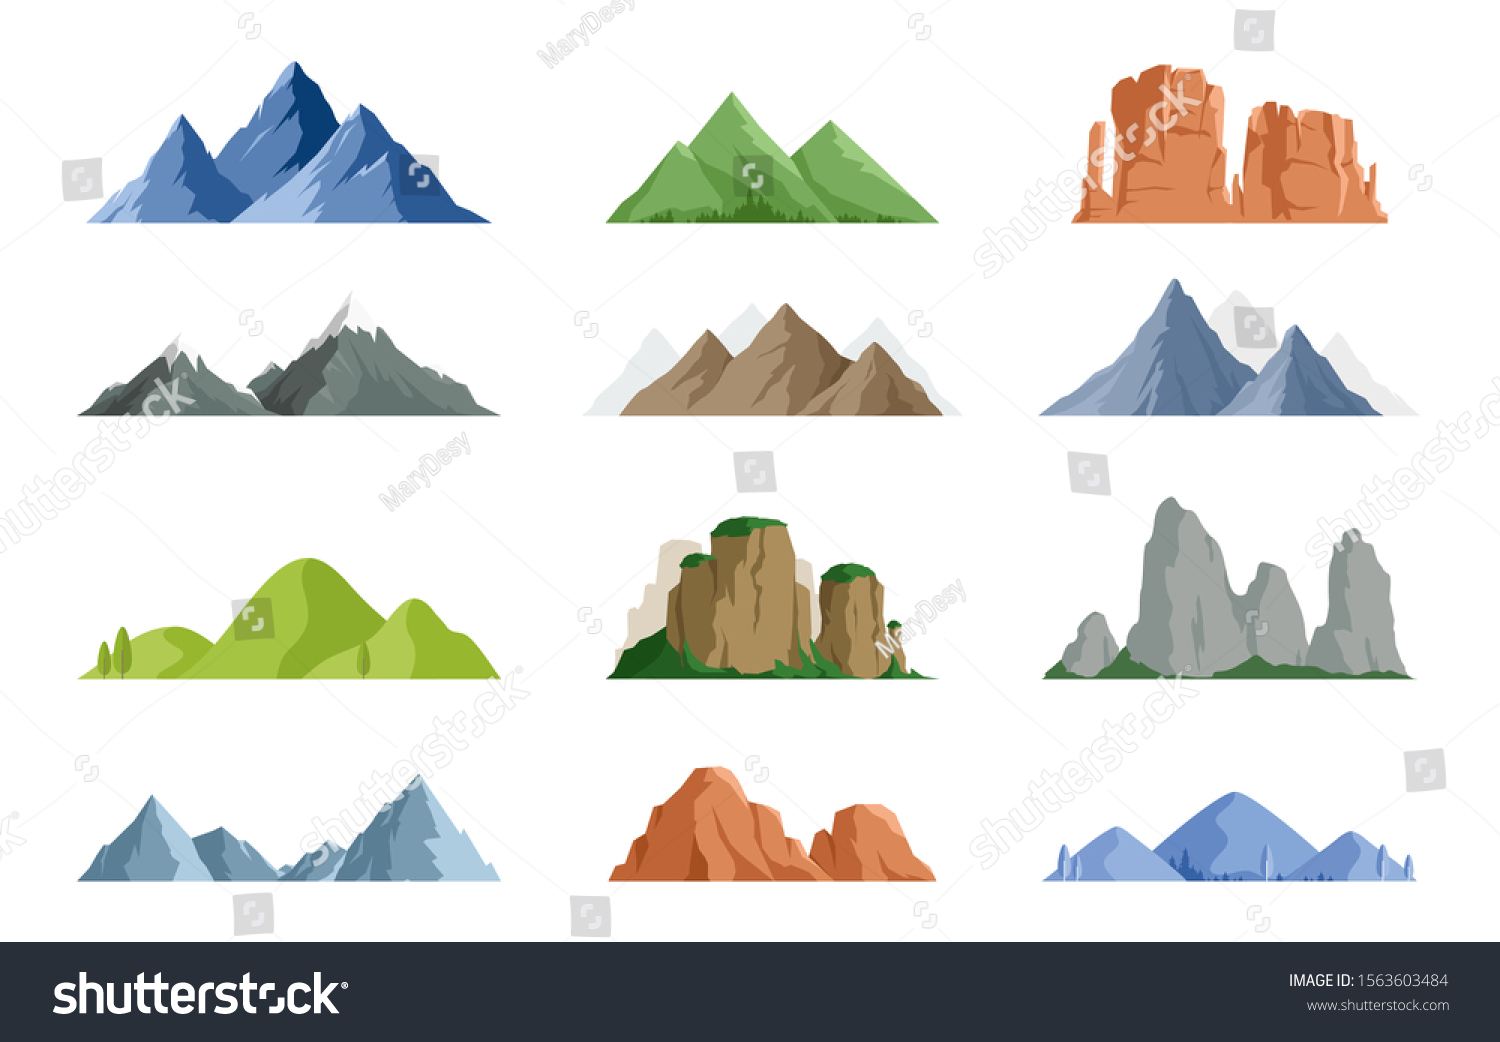 Vector set of isolated snowy mountains, mountain peak, hill top, iceberg, nature landscape. Camping landscape and hiking illustration. Outdoor travel,  adventure, tourism, climbing design elements